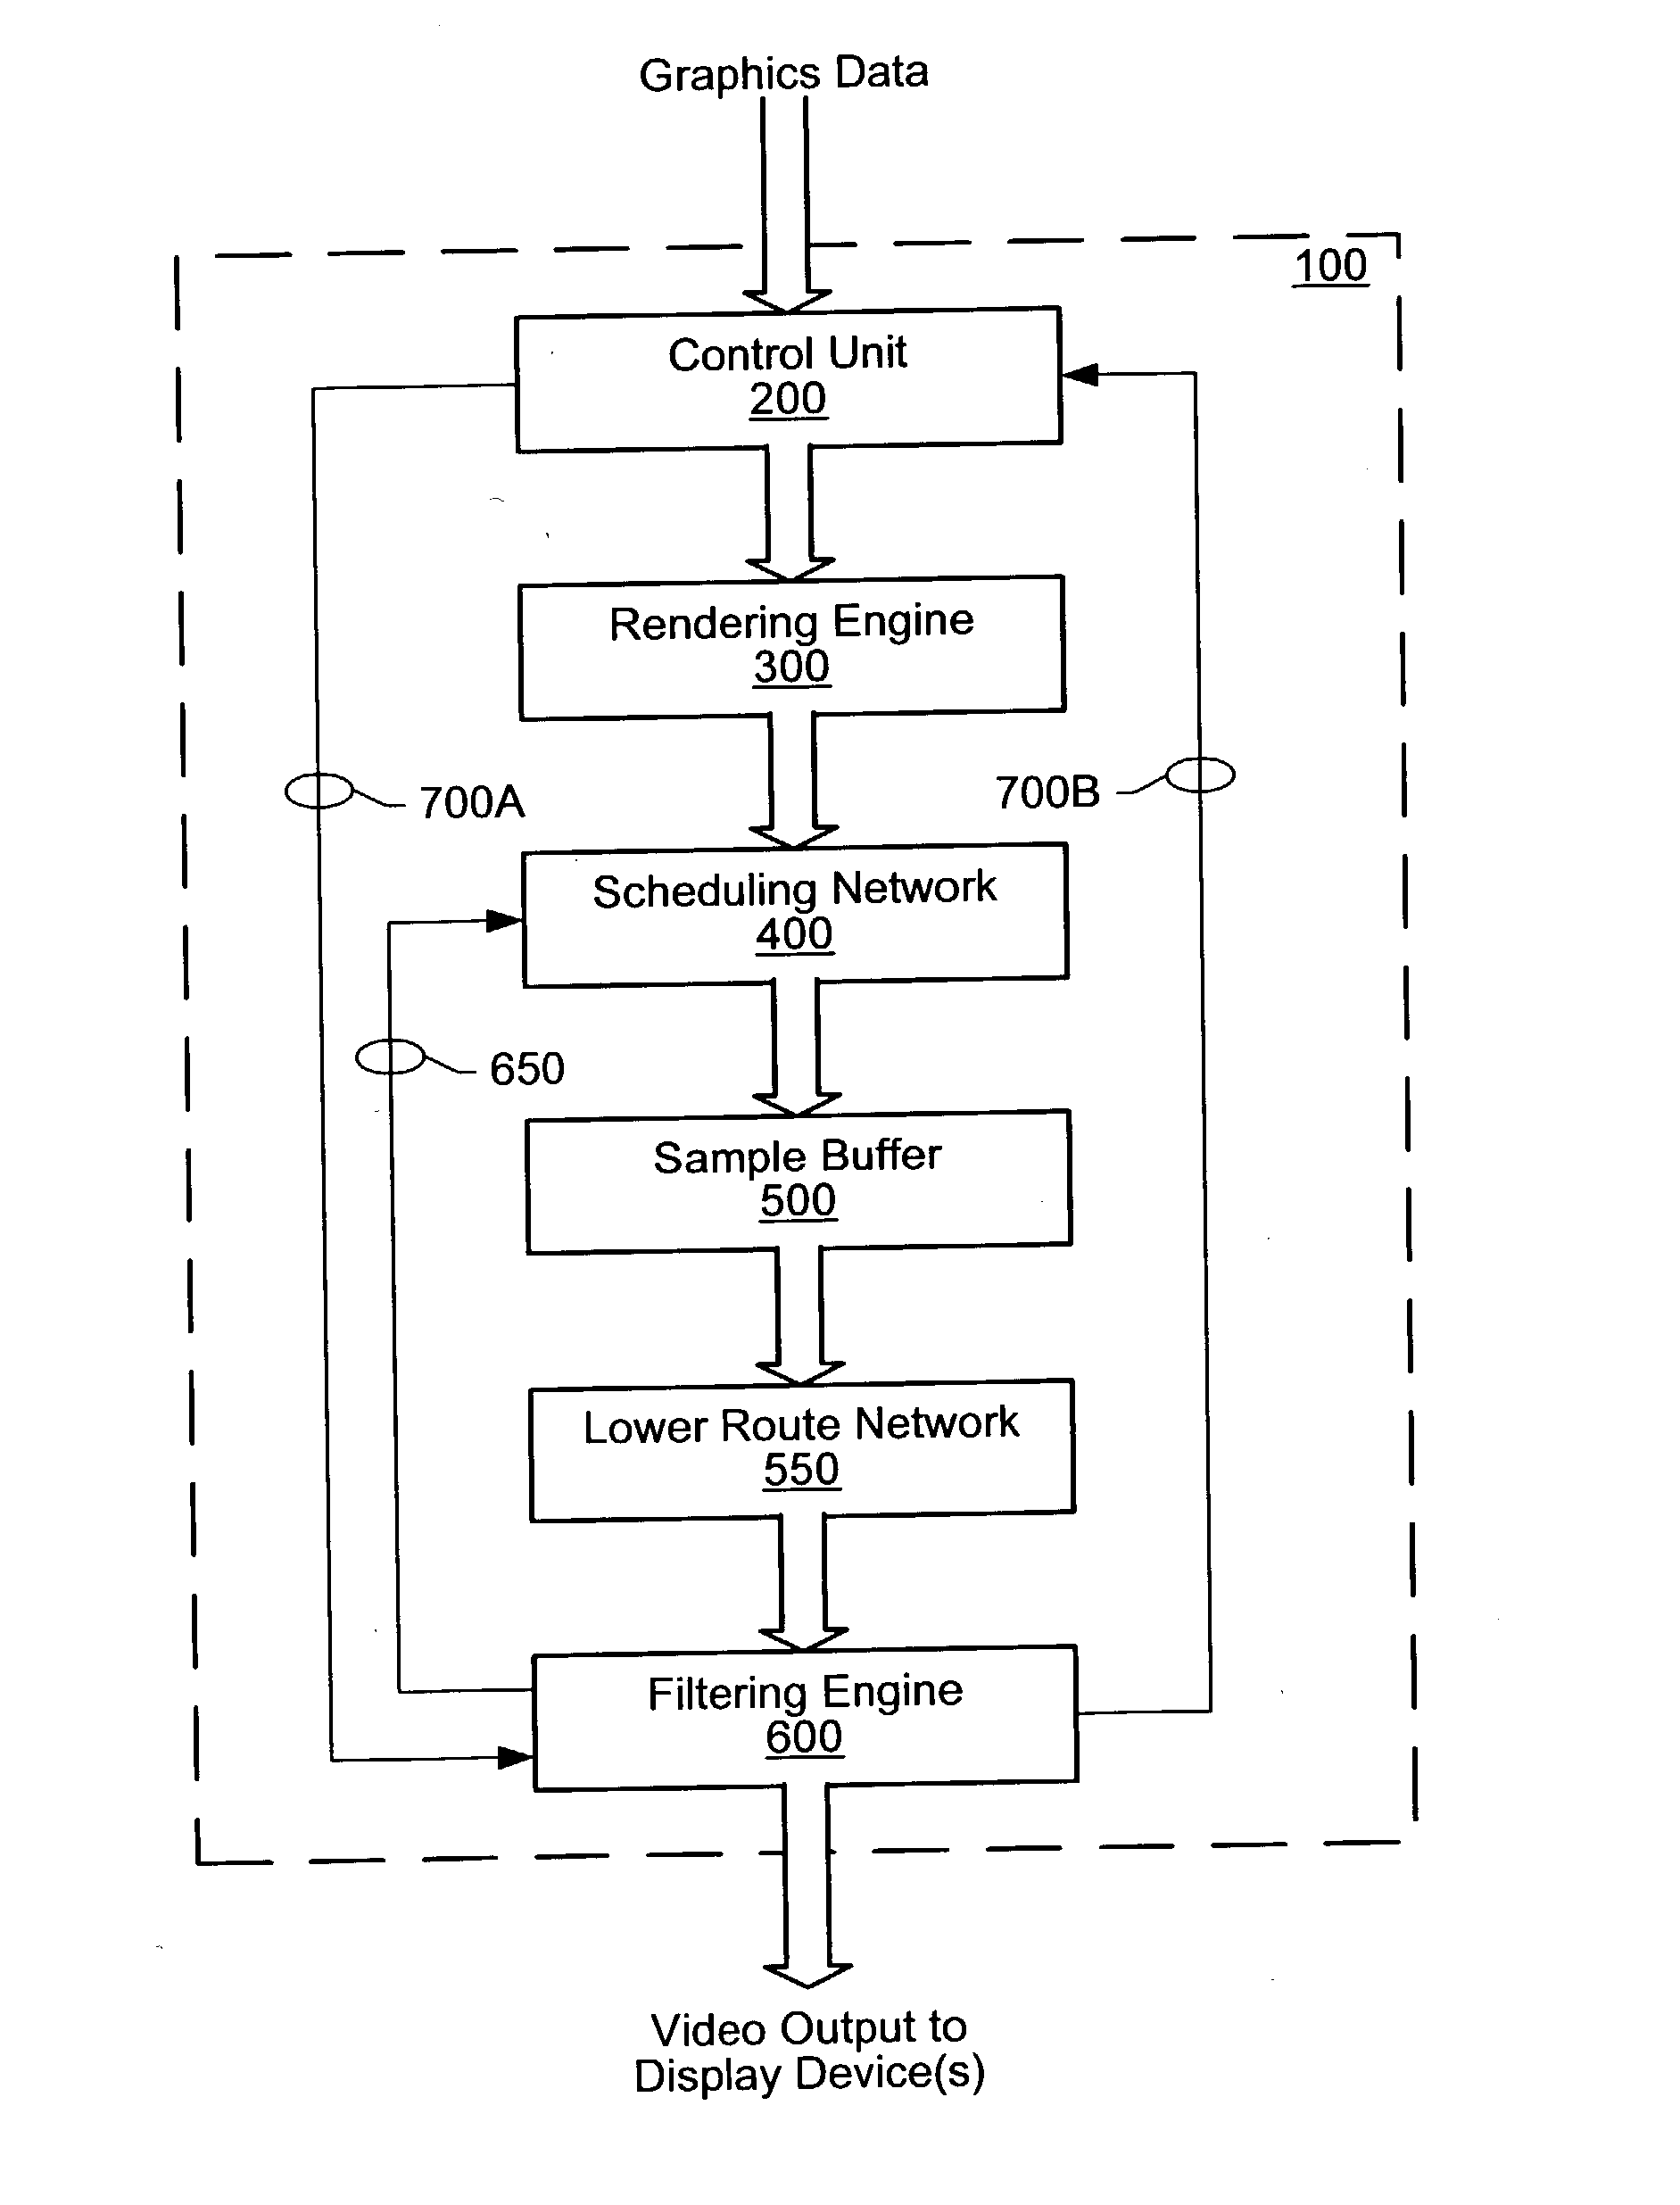 Novel design for a non-blocking cache for texture mapping